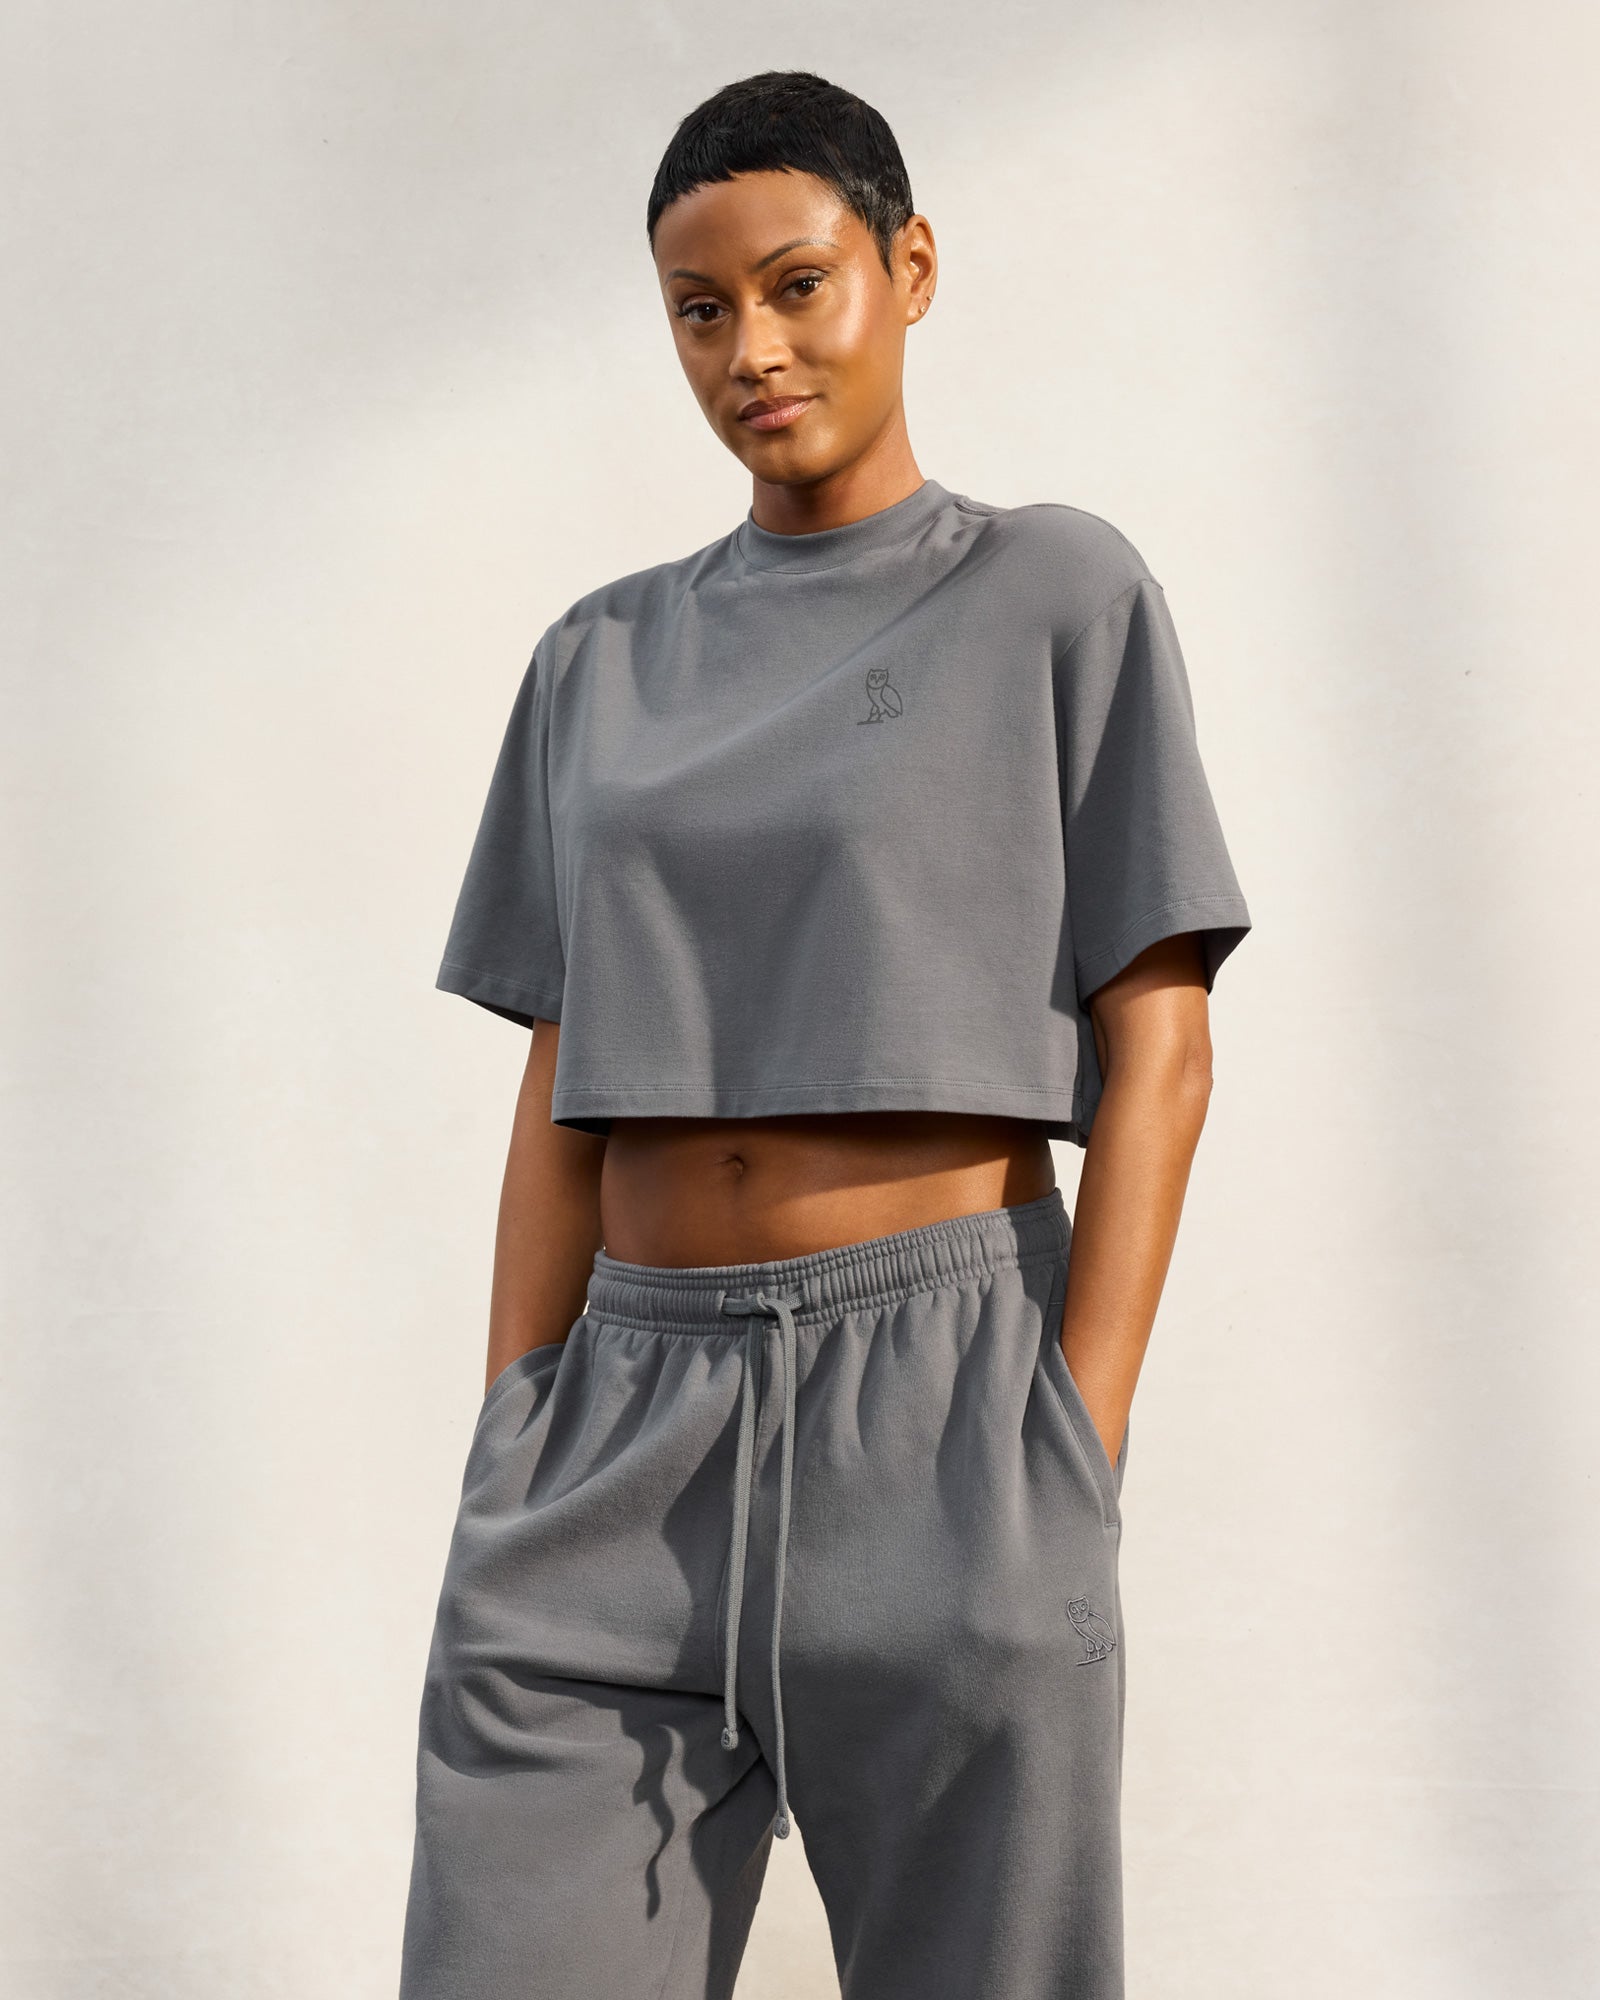 Cropped T-Shirt - Charcoal